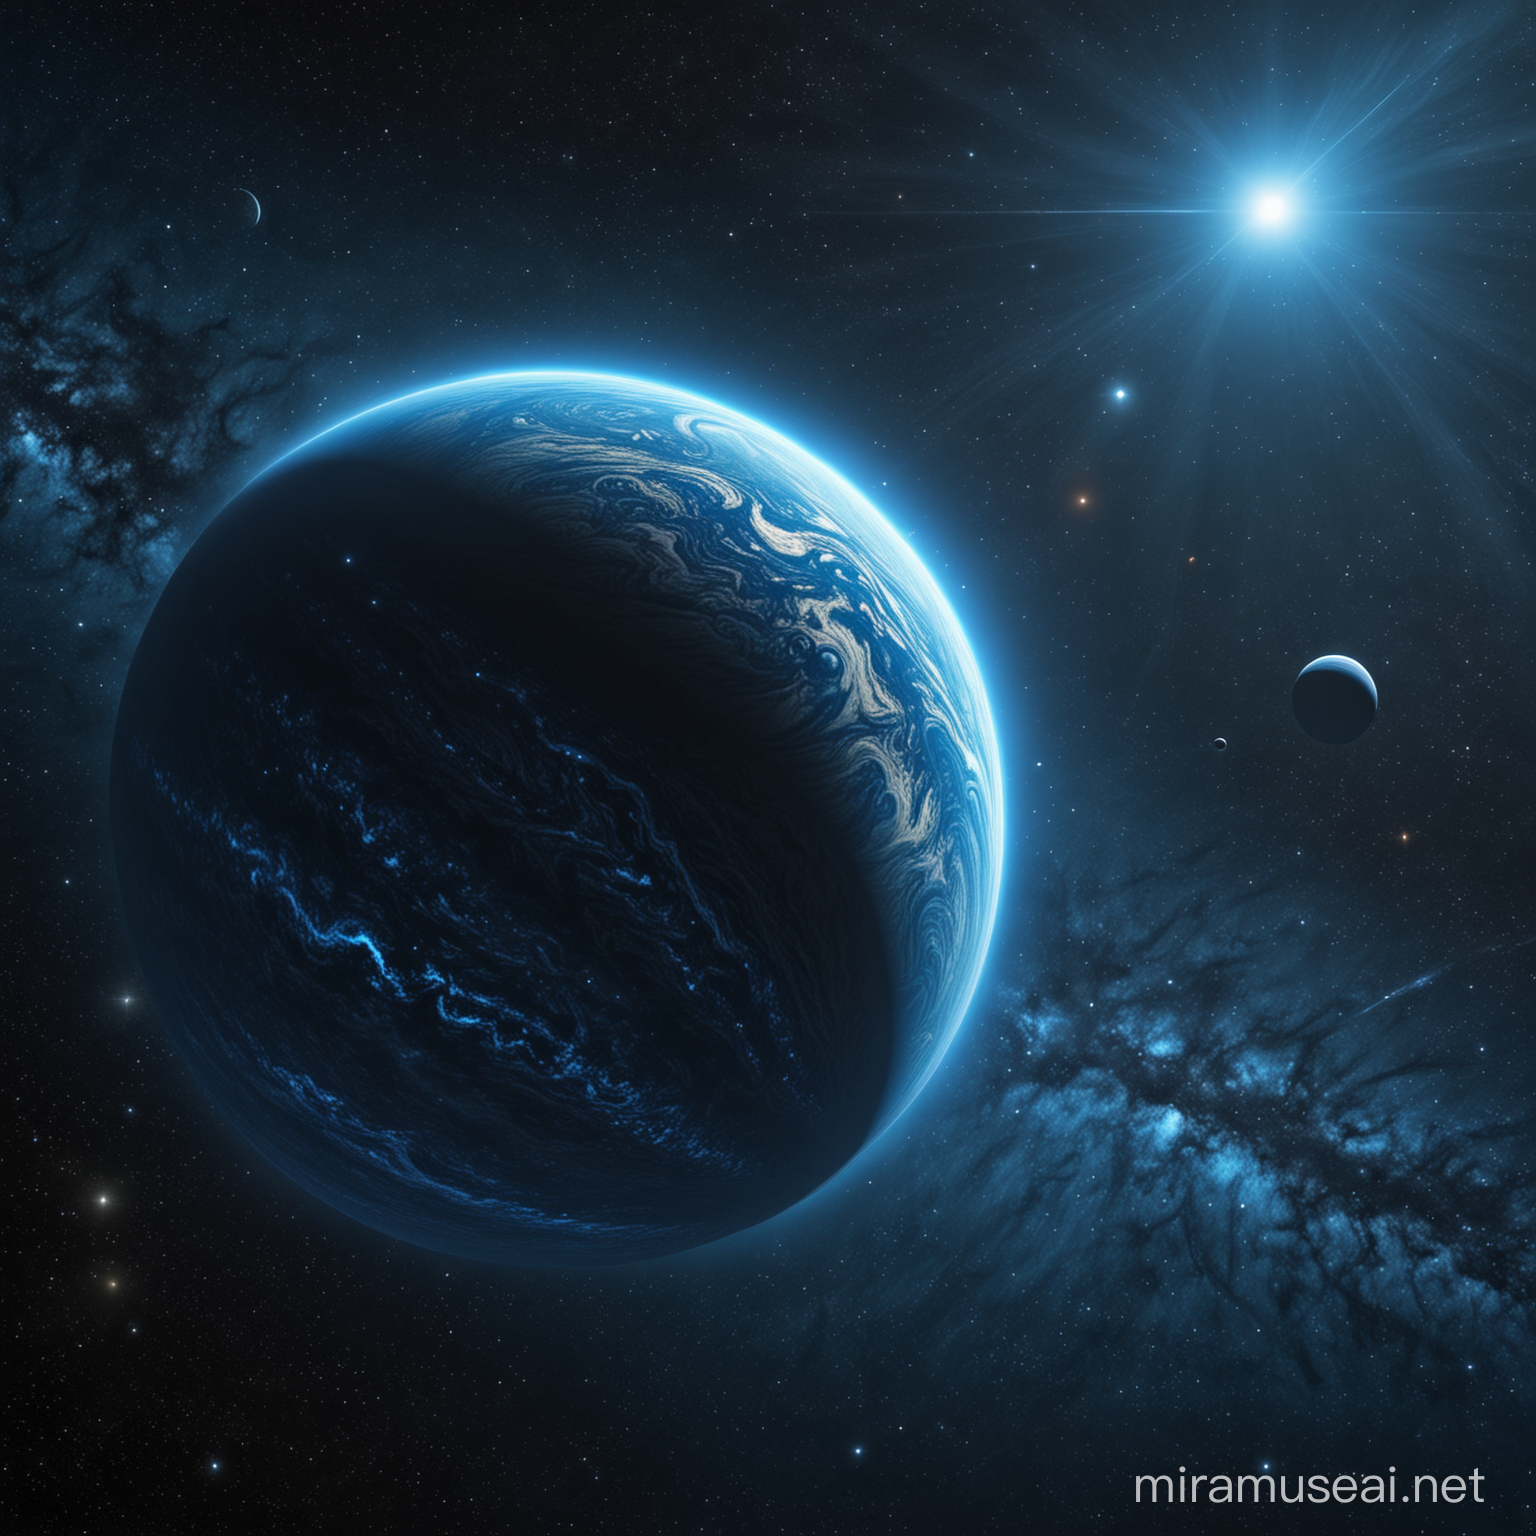 A Gas Giant exoplanet with azure blue hue and beautiful dark blue cosmic background.